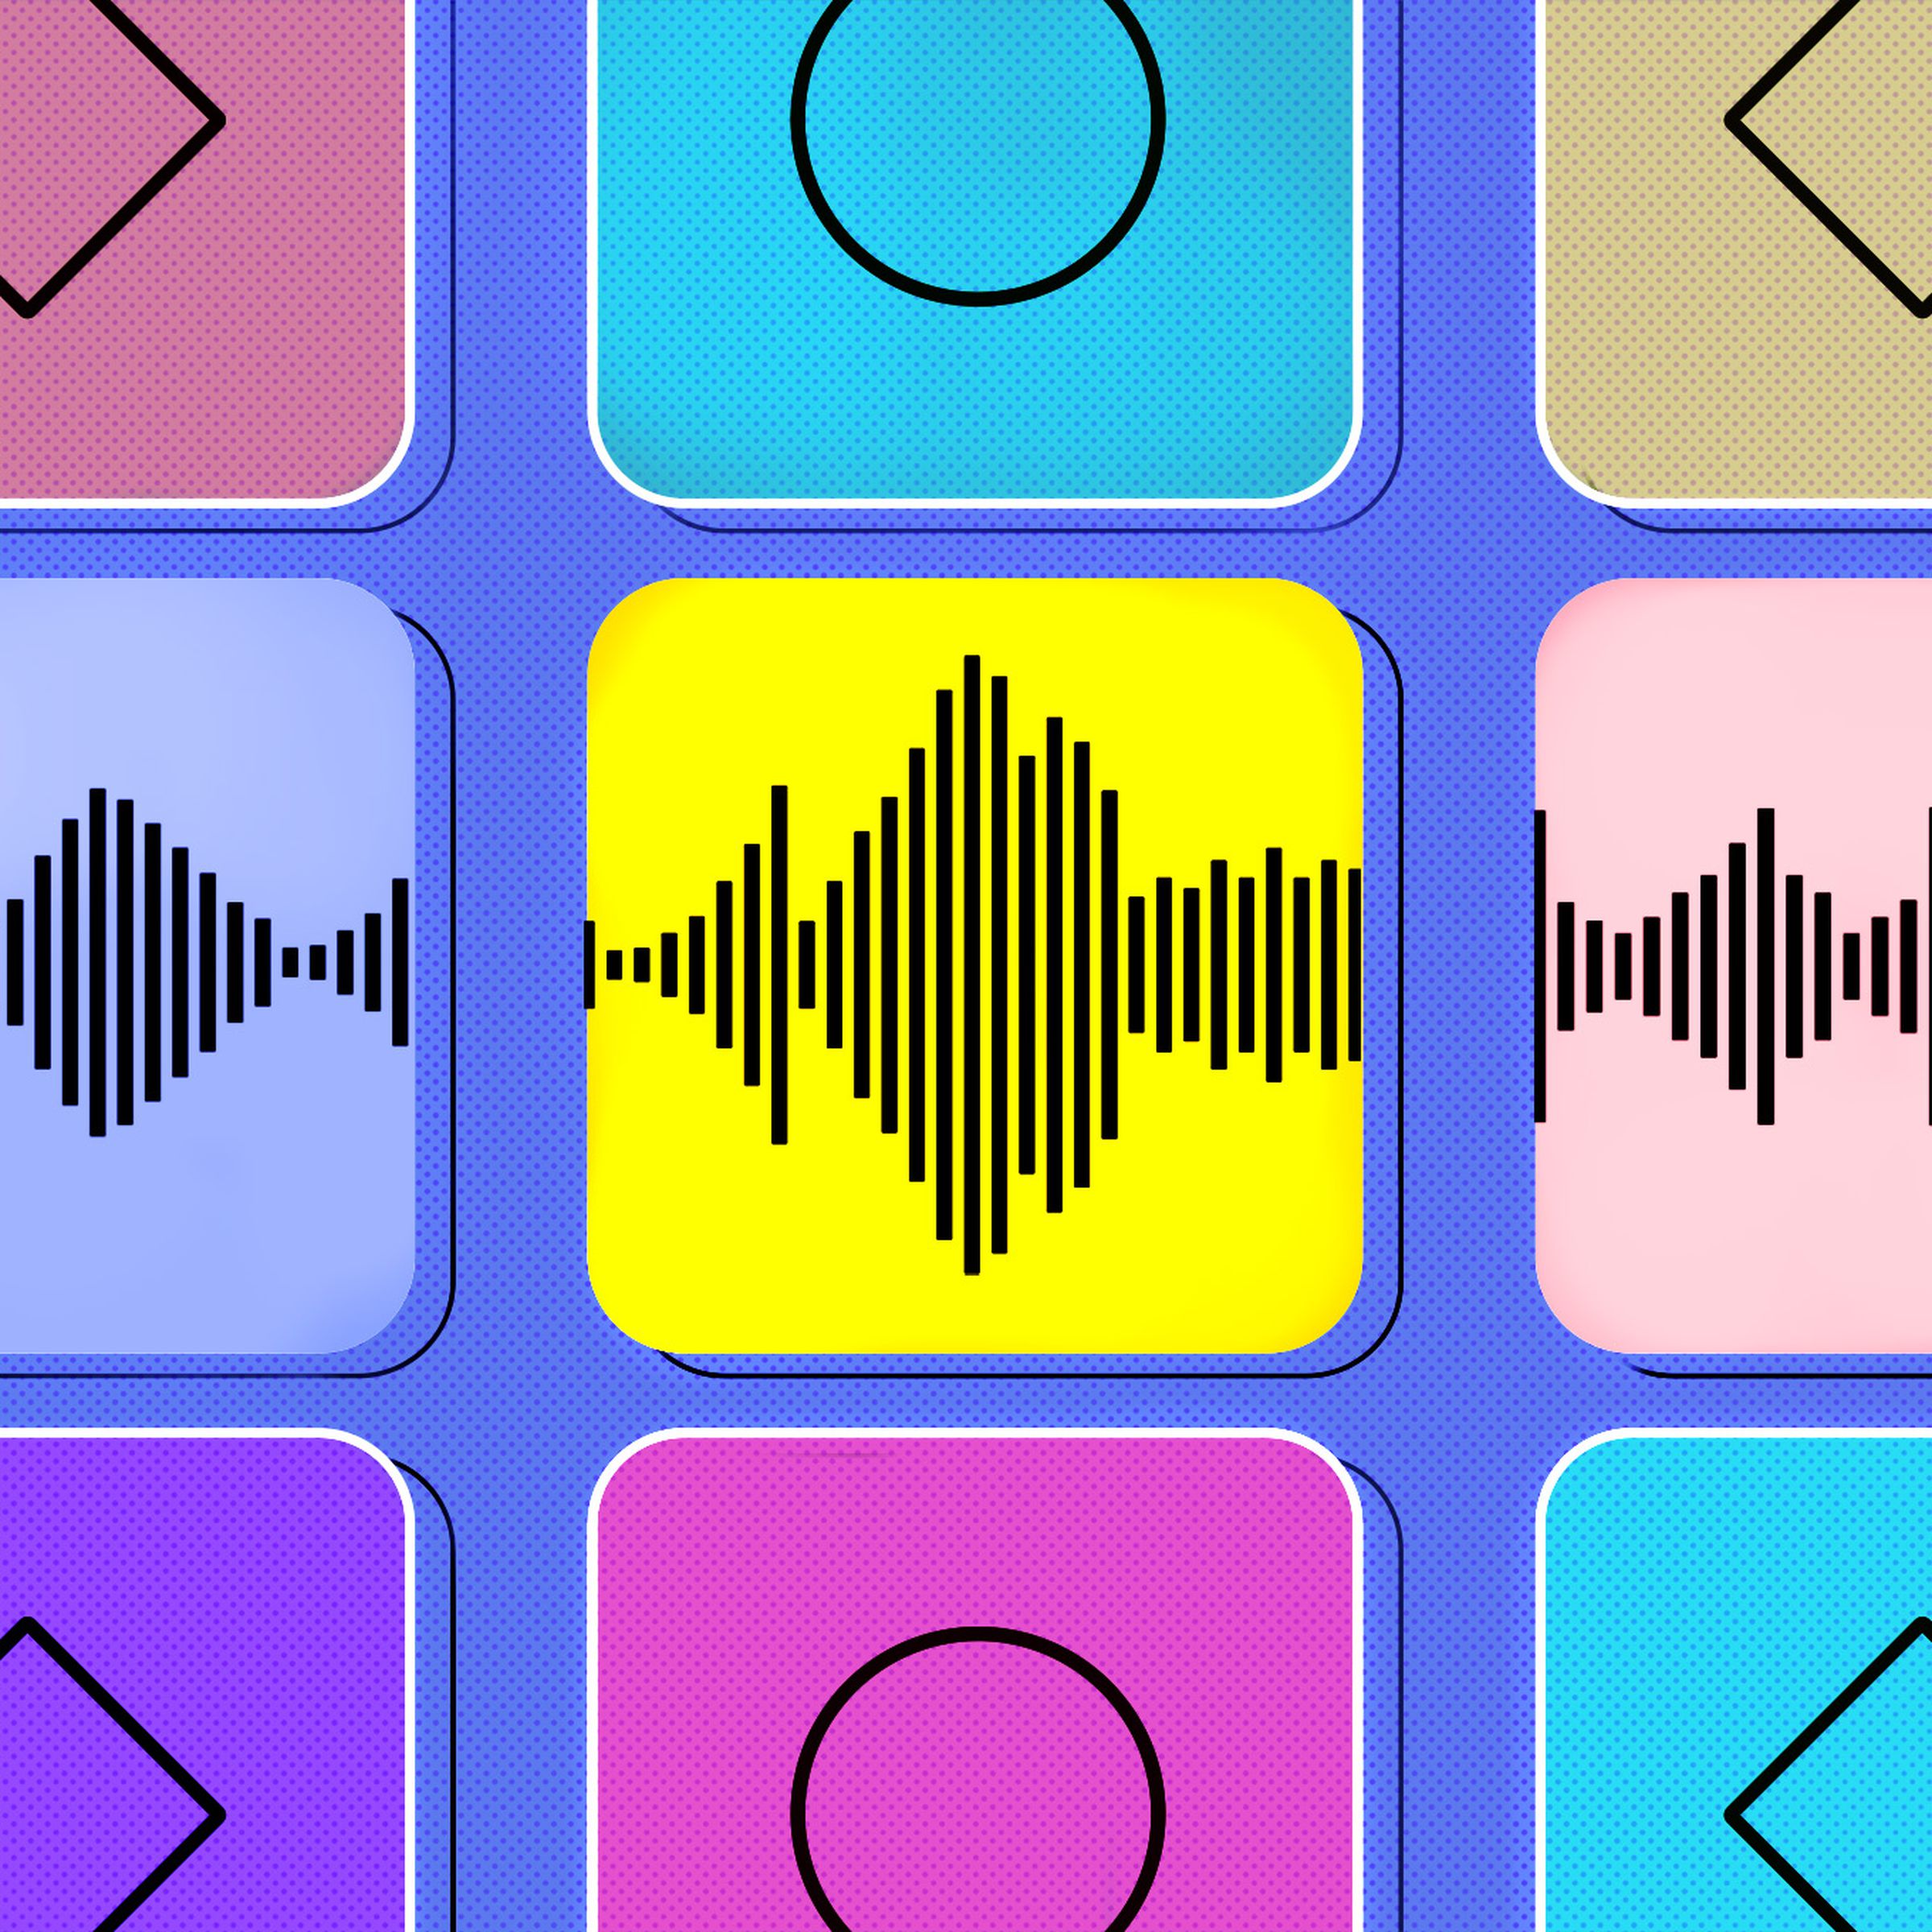 Nine colorful squares on a pale blue background. The middle row of squares have audio waveforms in them.